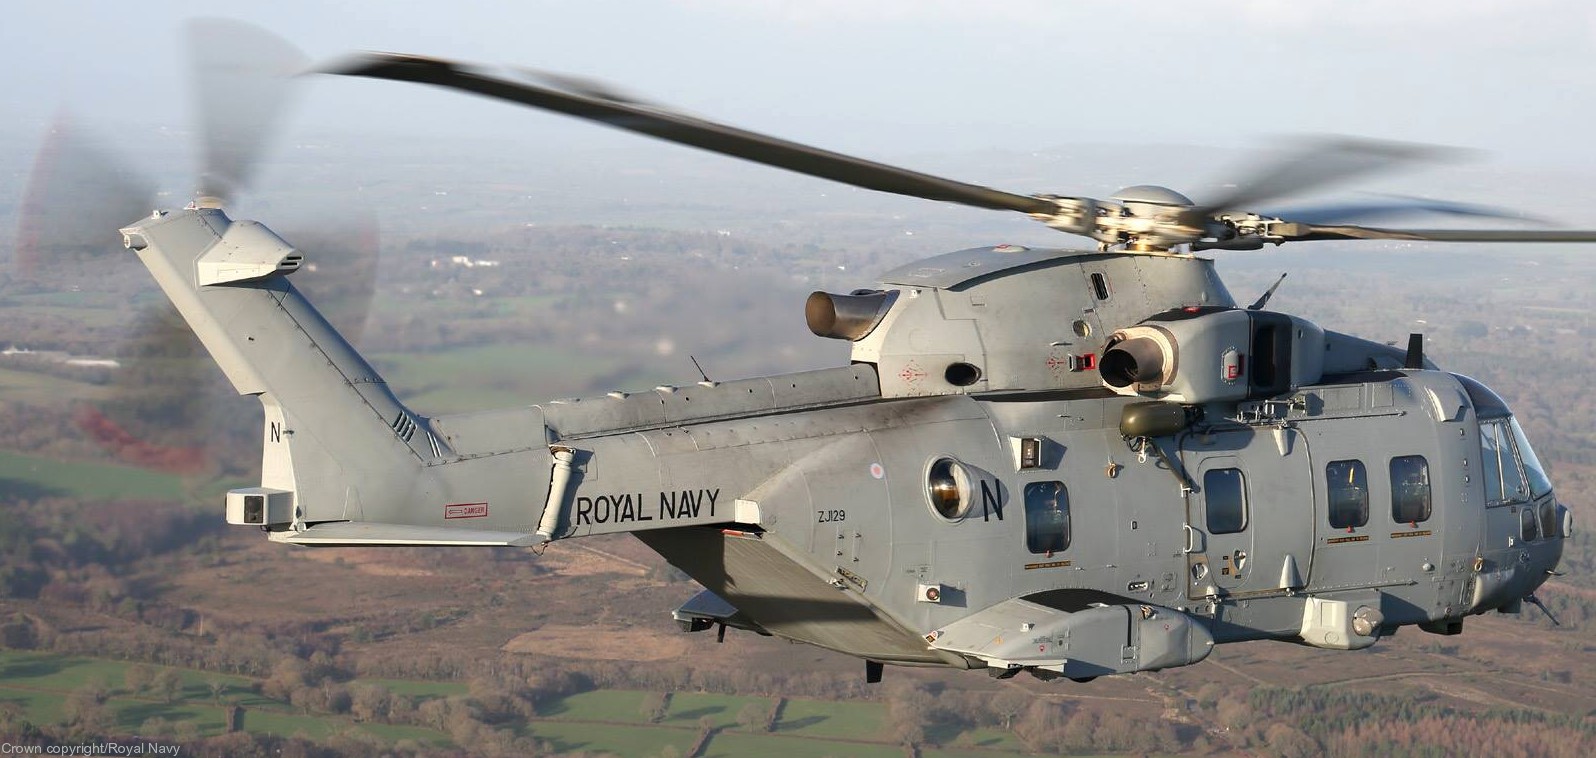 merlin hc4 mk.4 commando helicopter force chf royal navy 845 846 naval air squadron rnas yeovilton aw101 53